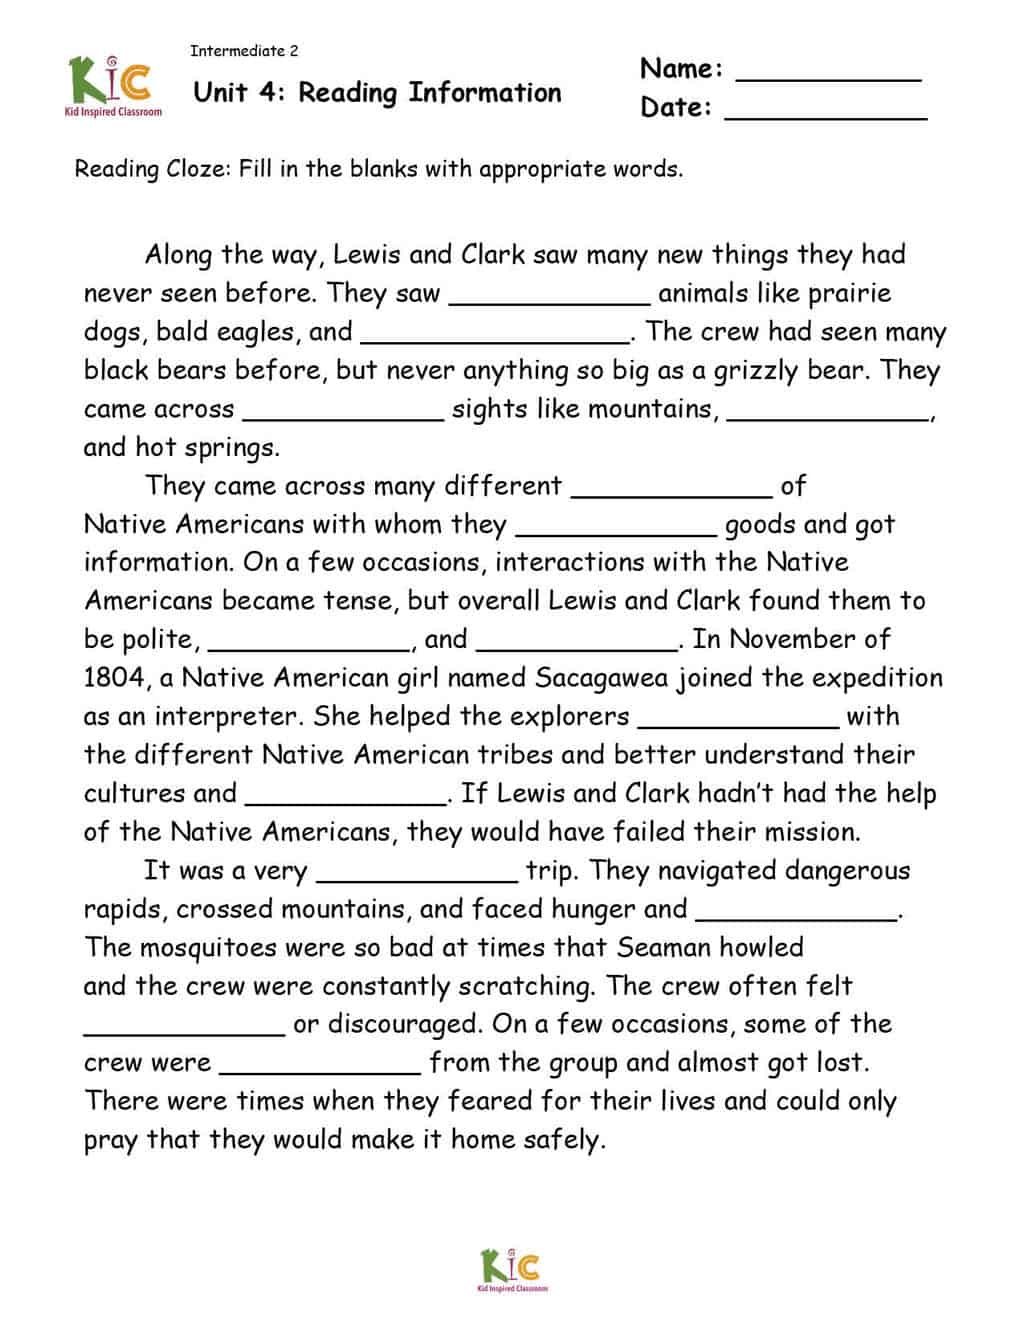 Lewis and Clark Reading Cloze for ESL Reading Comprehension 